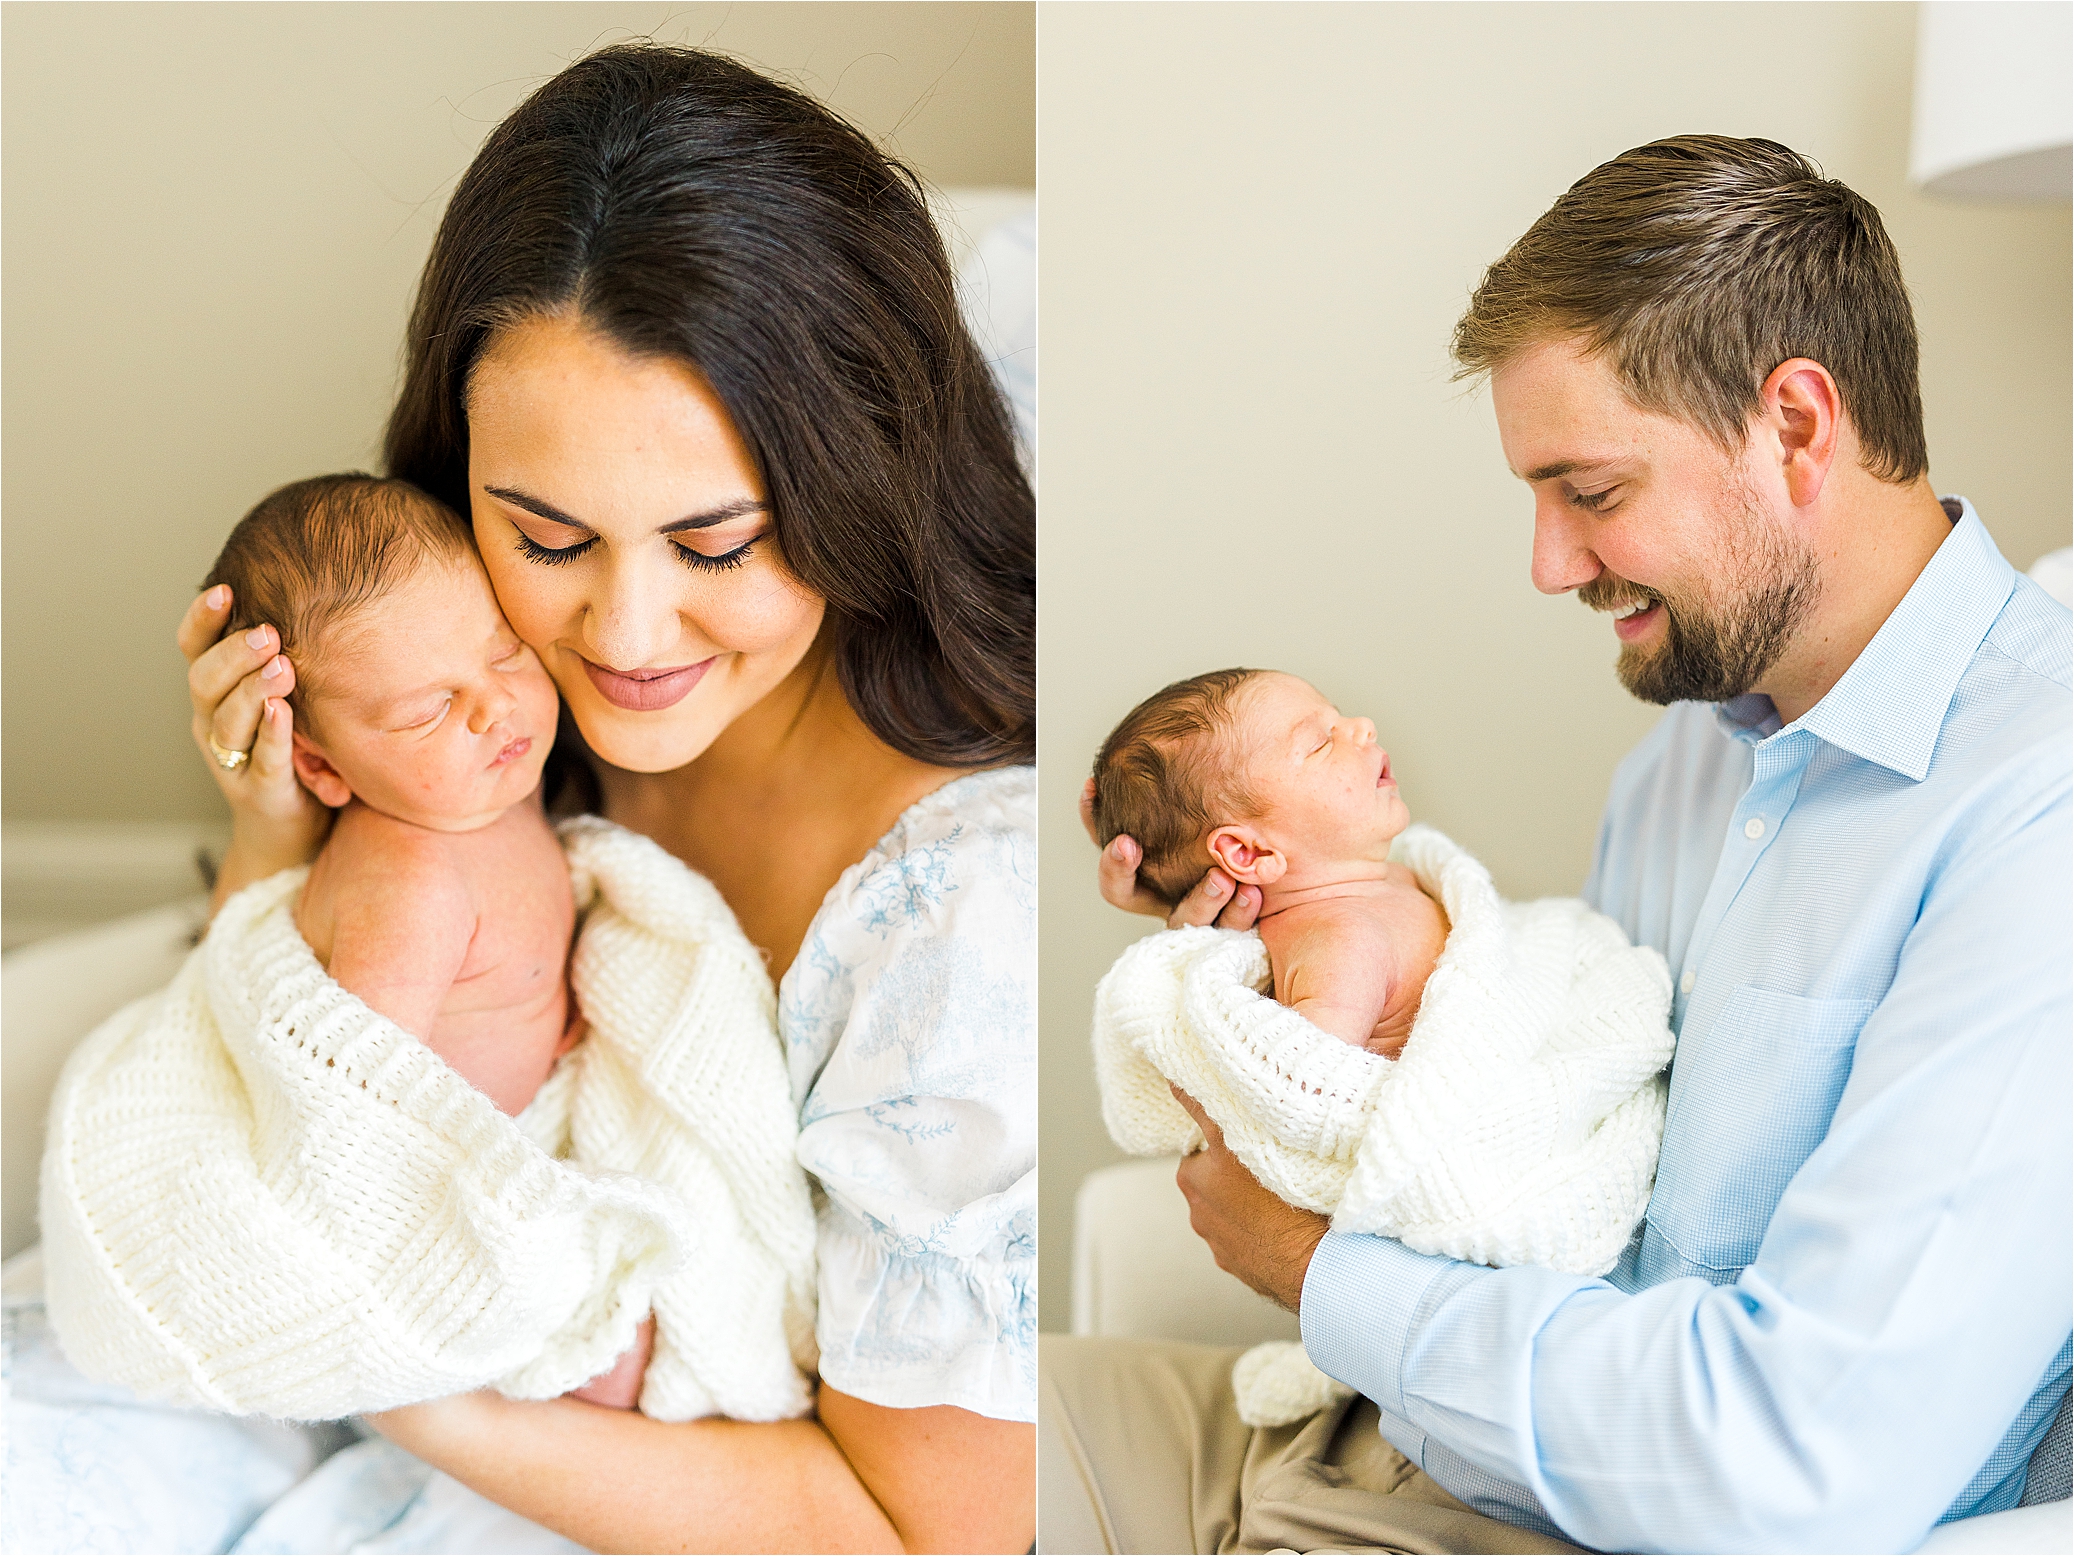 Smiles and cheek to cheek with a couple's newborn baby boy during their lifestyle newborn photos in San Antonio, Texas